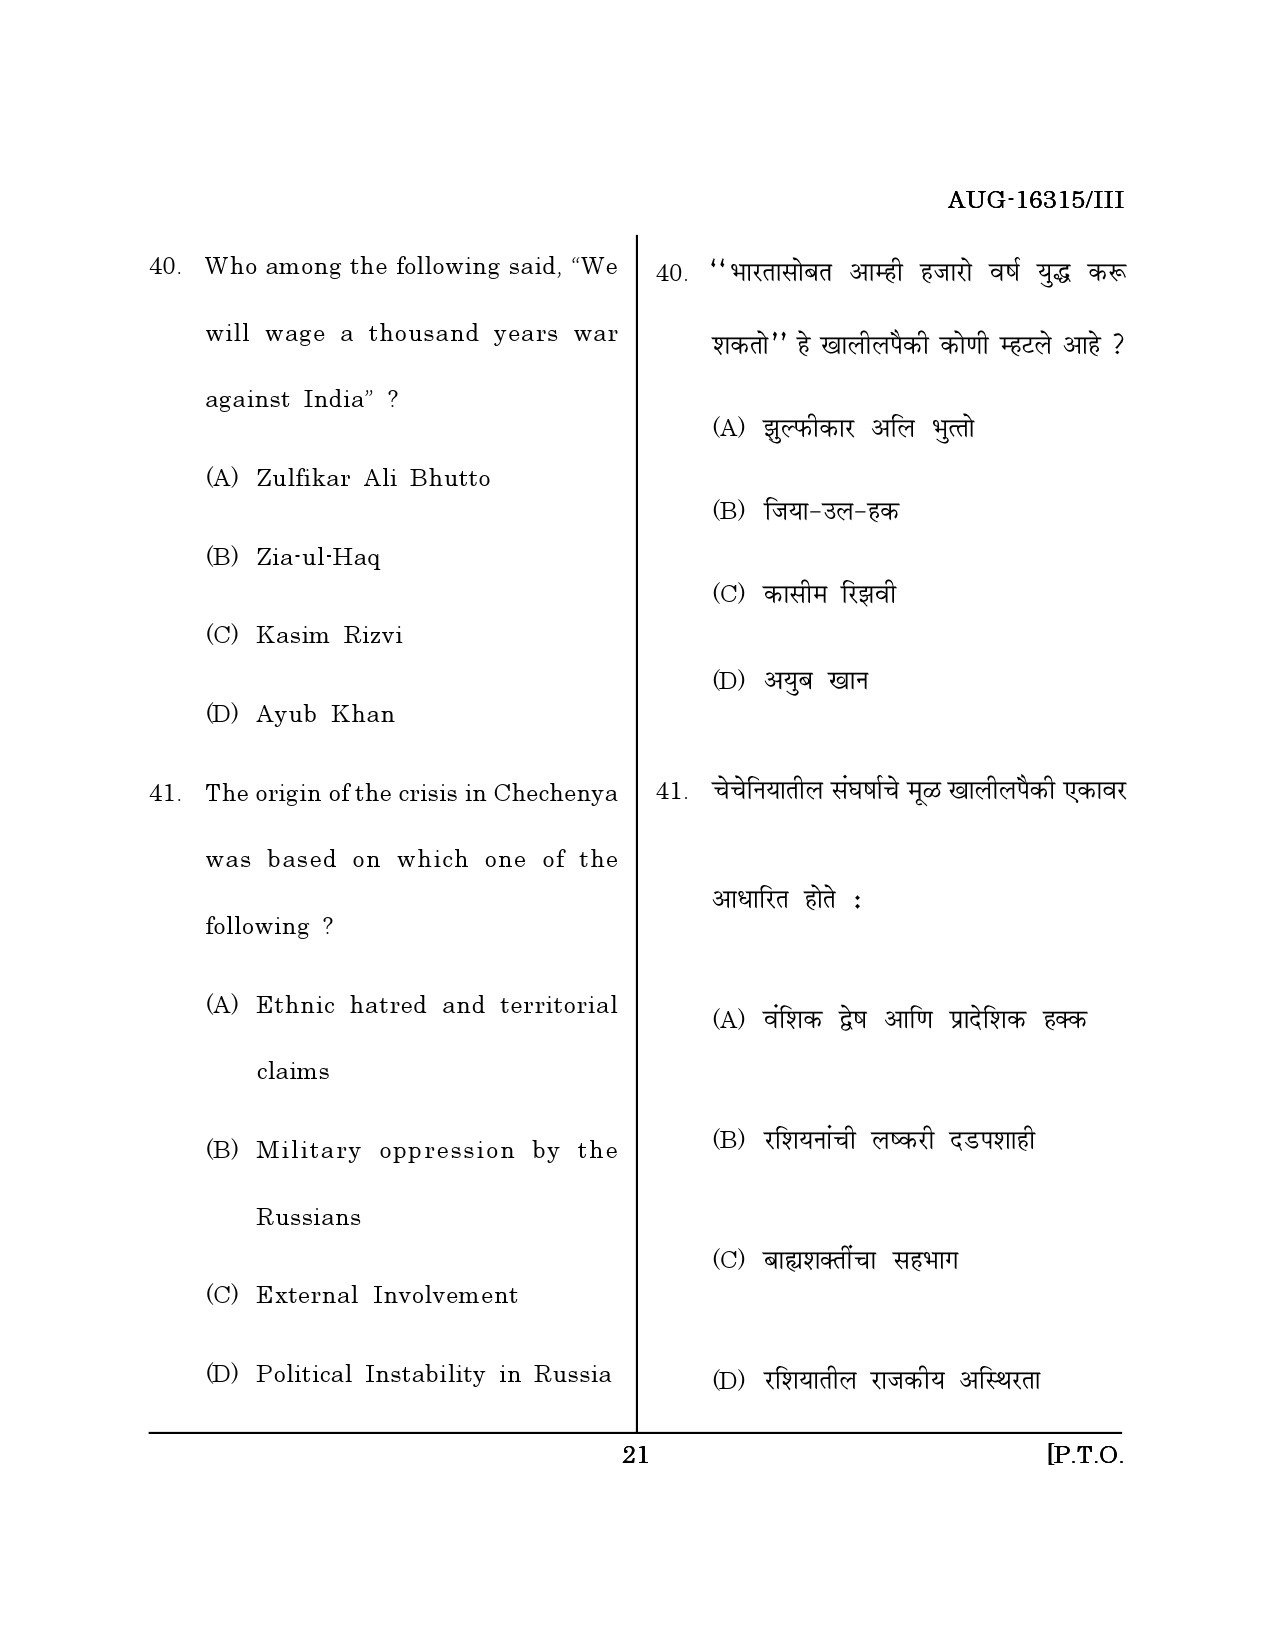 Maharashtra SET Defence and Strategic Studies Question Paper III August 2015 20